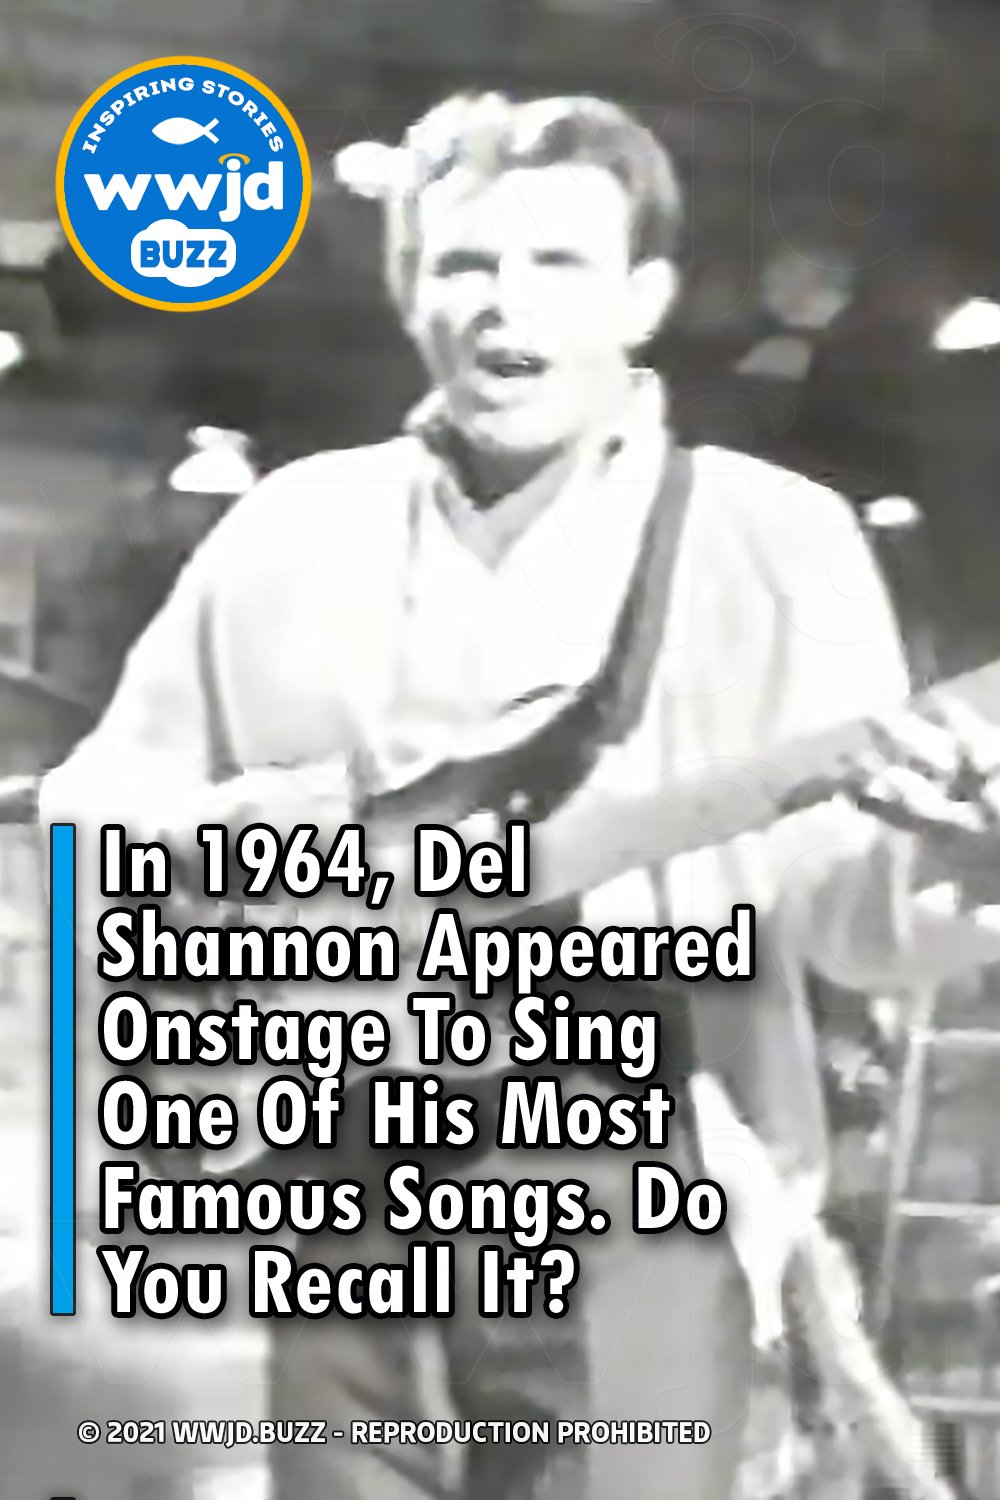 In 1964, Del Shannon Appeared Onstage To Sing One Of His Most Famous Songs. Do You Recall It?